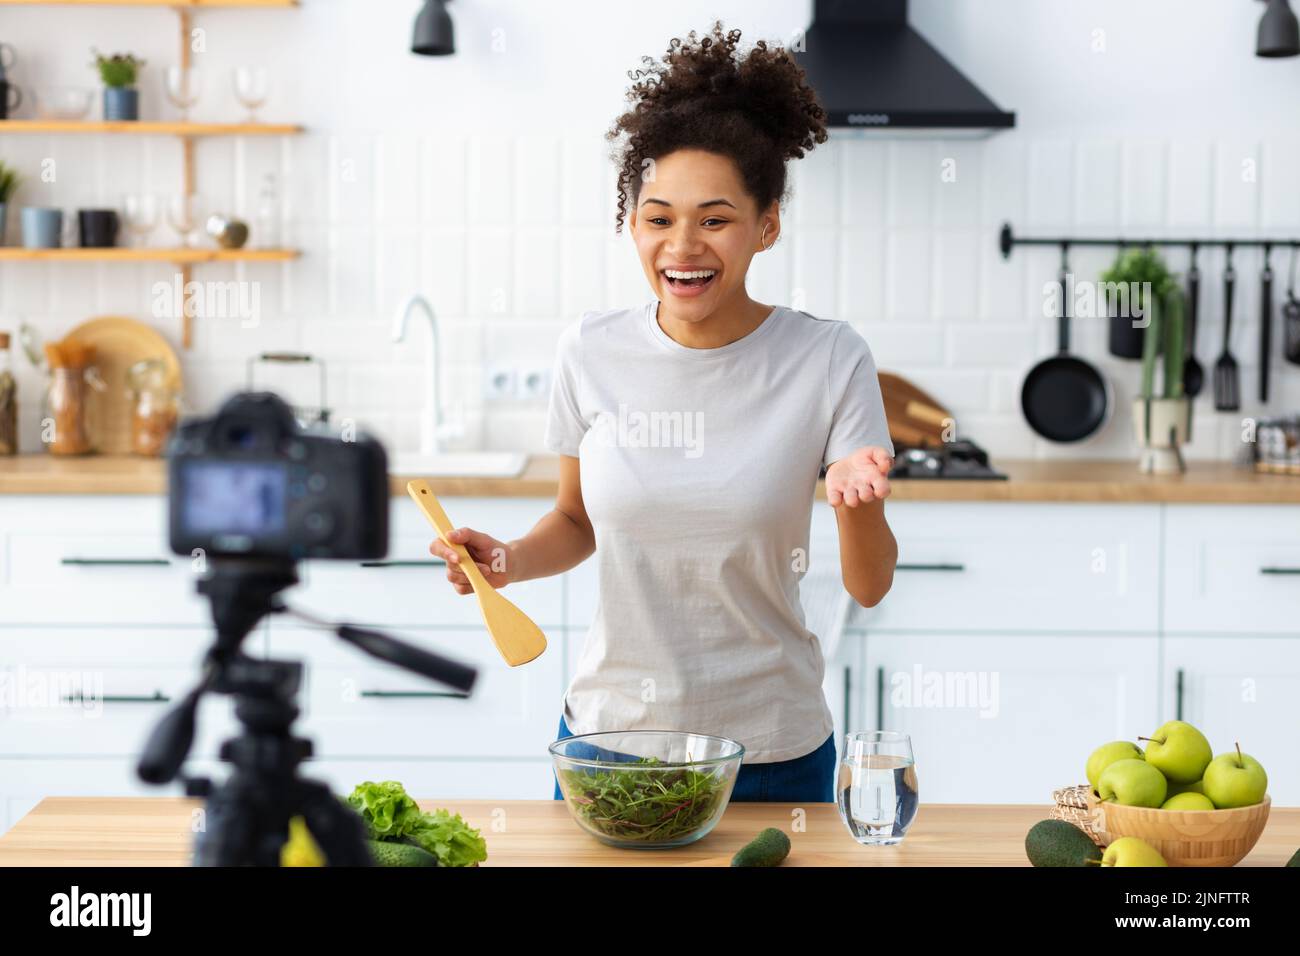 young female preparing salad in home kitchen Beautiful woman using camera to record video of cooking healthy food Stock Photo